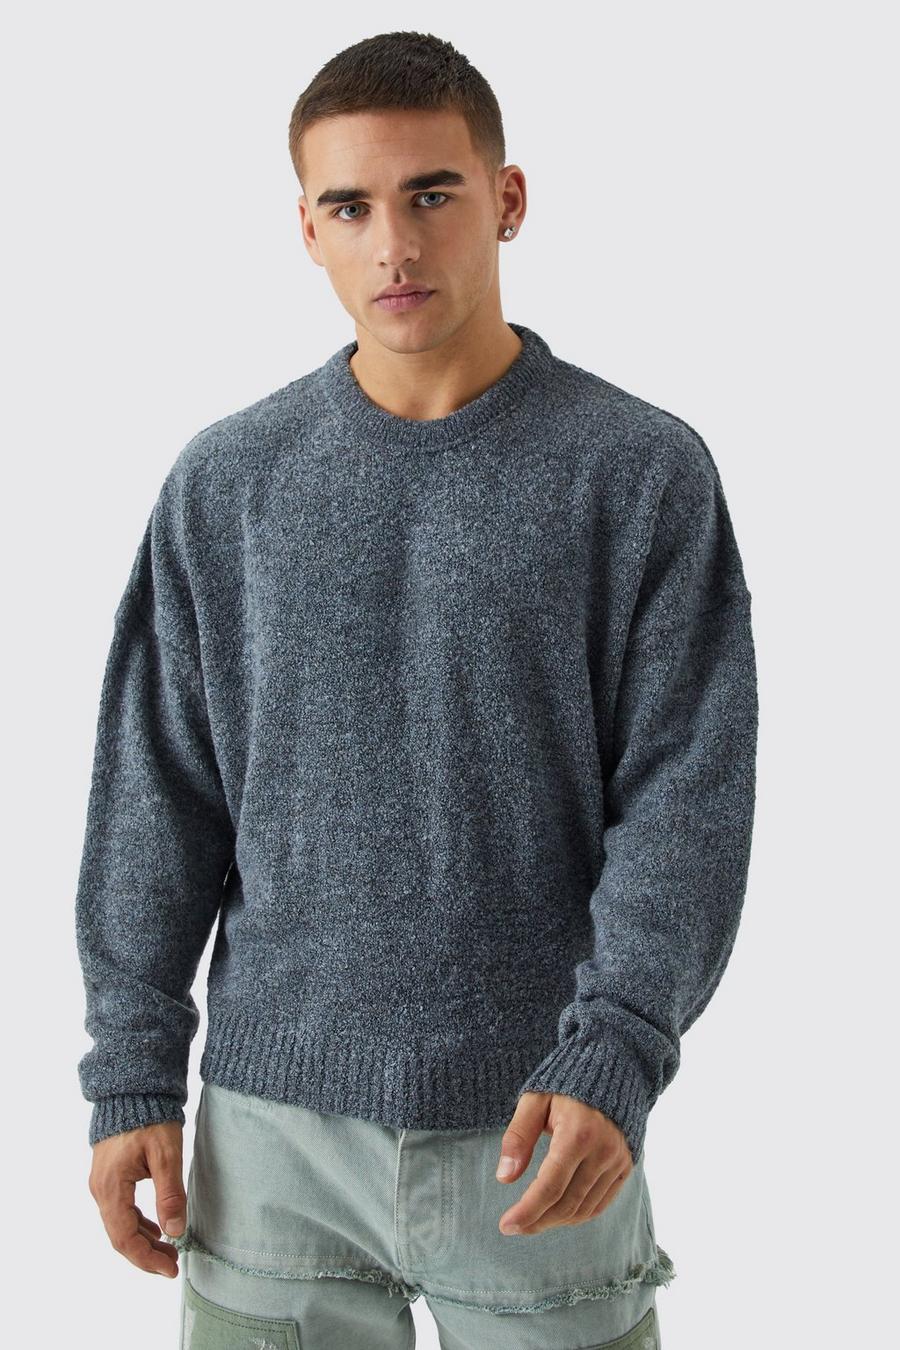 Charcoal grey Boxy Boucle Knit Extended Neck Jumper